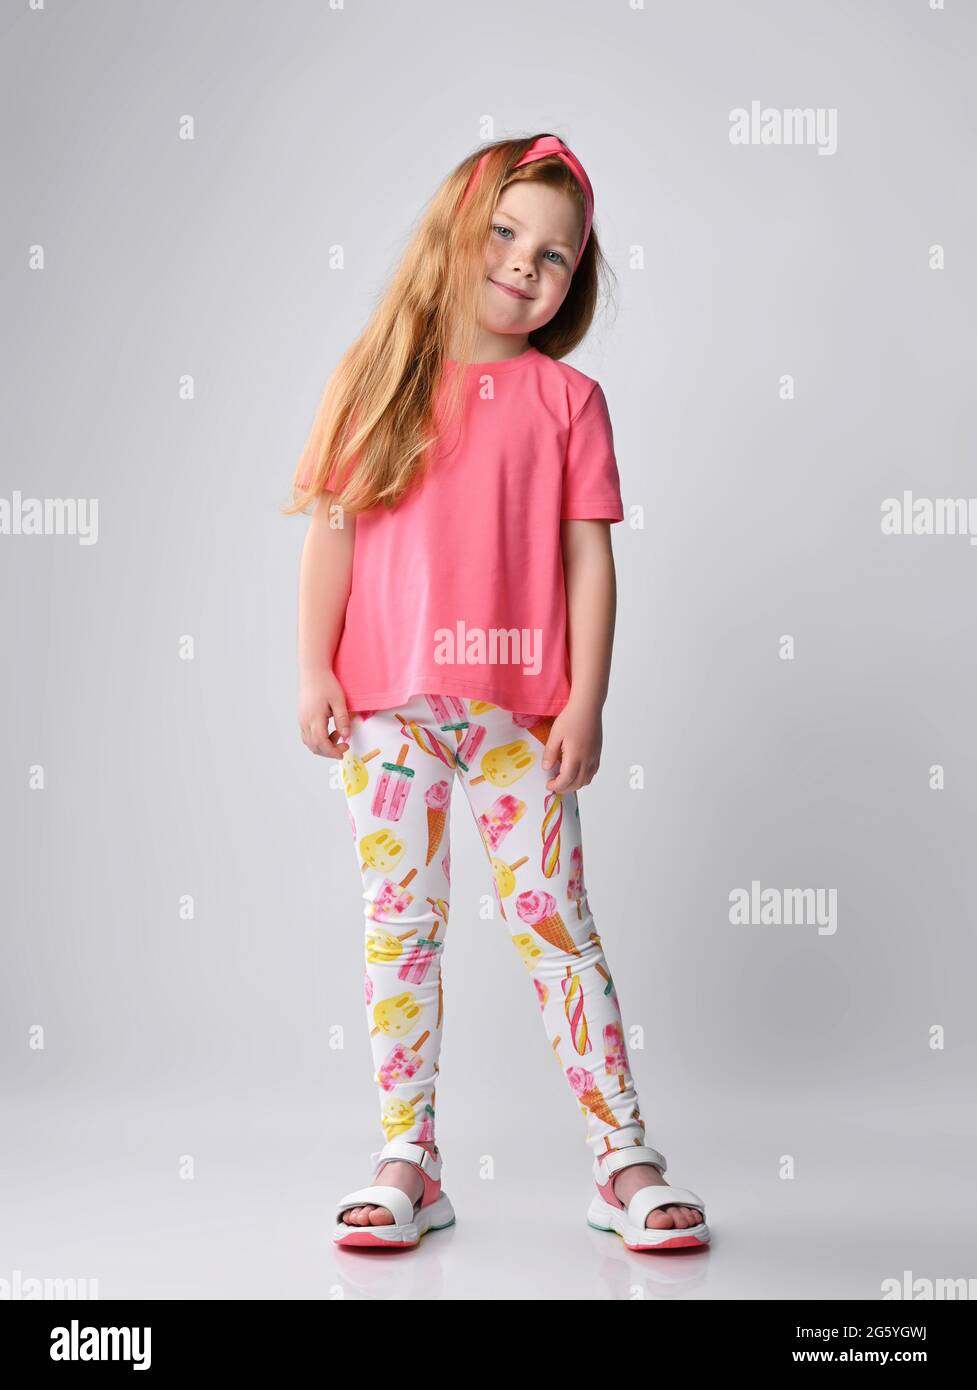 Red-haired kid girl in summer girlish clothing, wear pink t-shirt, colorful pants with ice-cream print and sandals Stock Photo